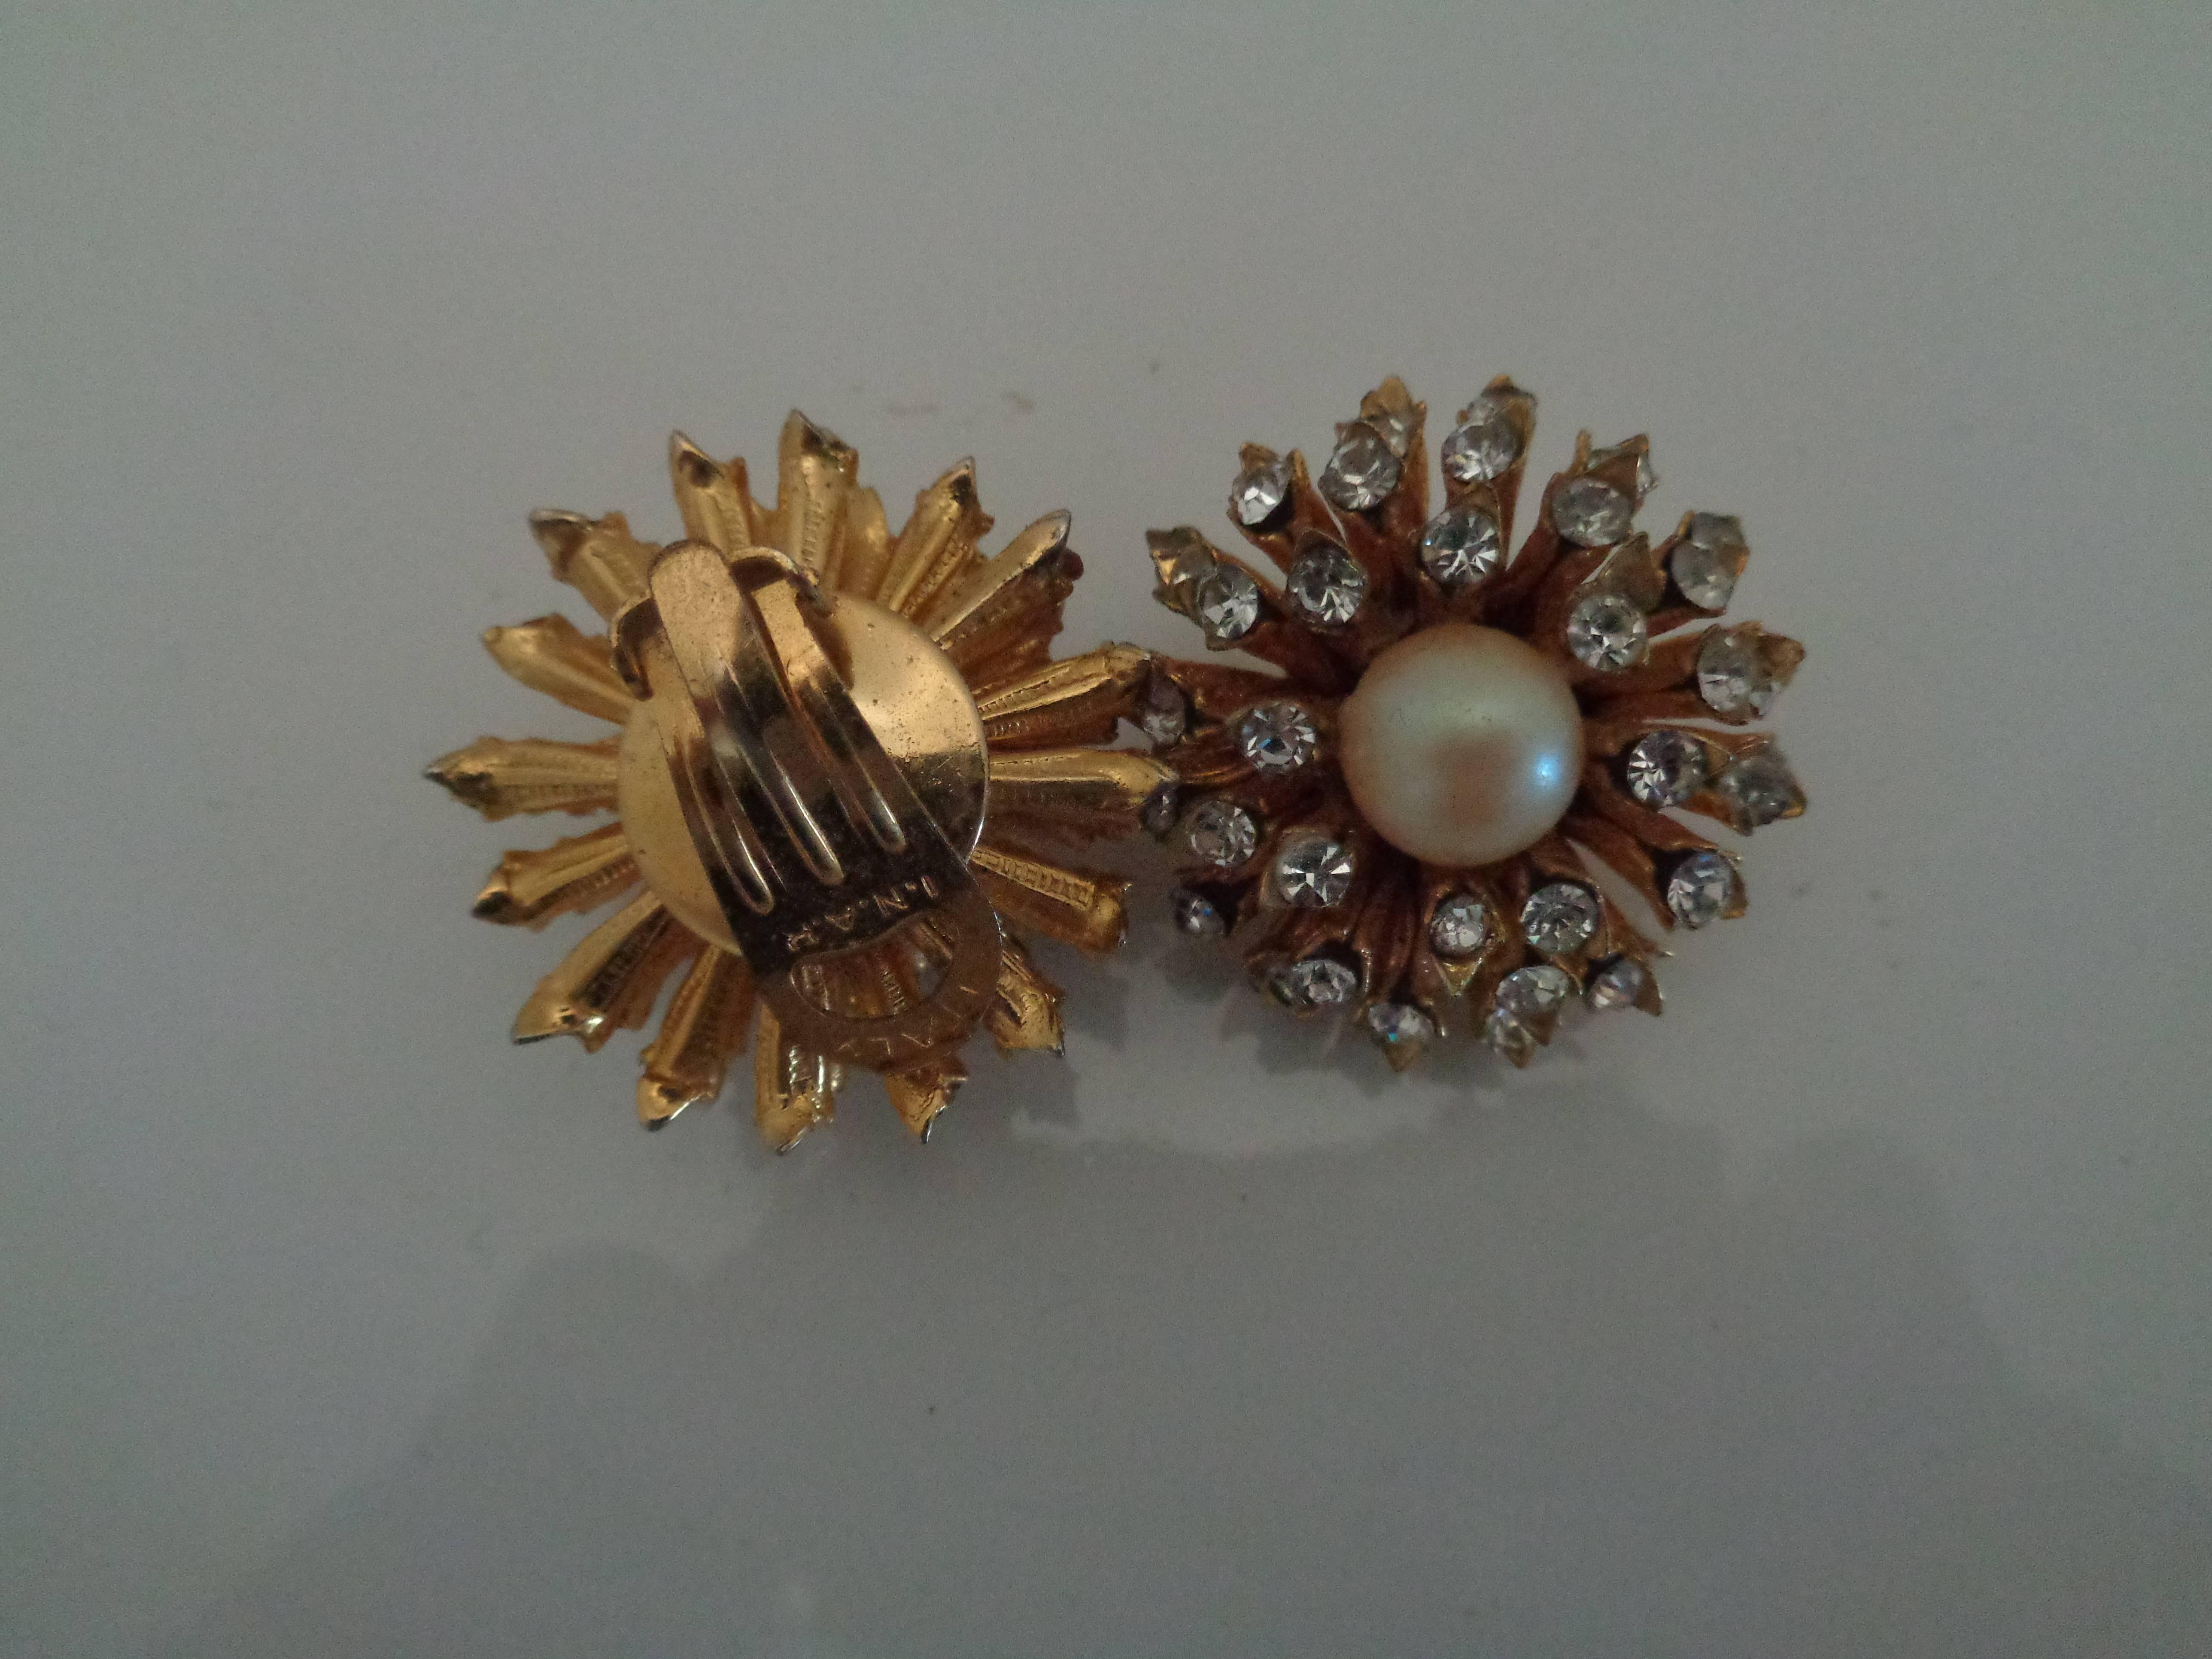 1980s I.N.A.P Gold tone with Crystal Swarovski and Faux Pearls Clip-on earrings
3.5 cm x 3.5 cm